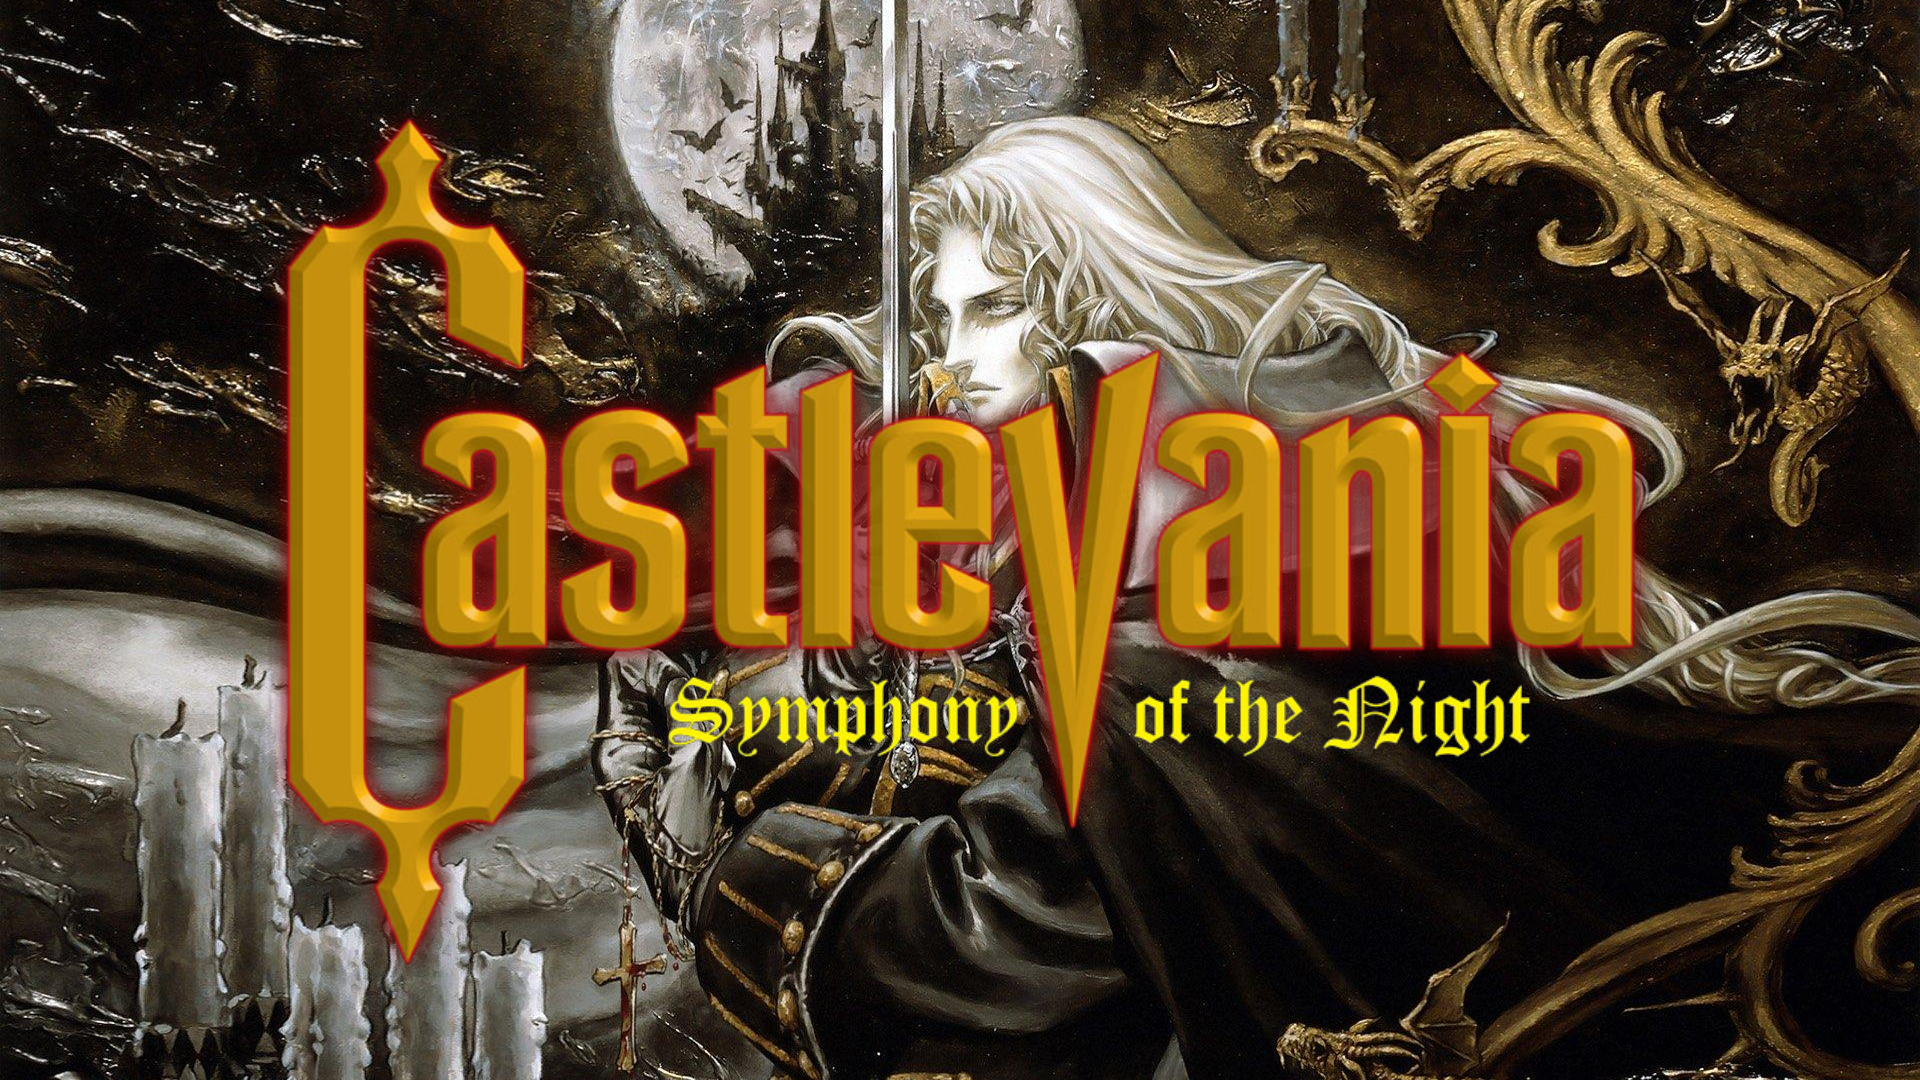 Castlevania: Symphony of the Night Comes to PS4 - Experience the Classic All Over Again!